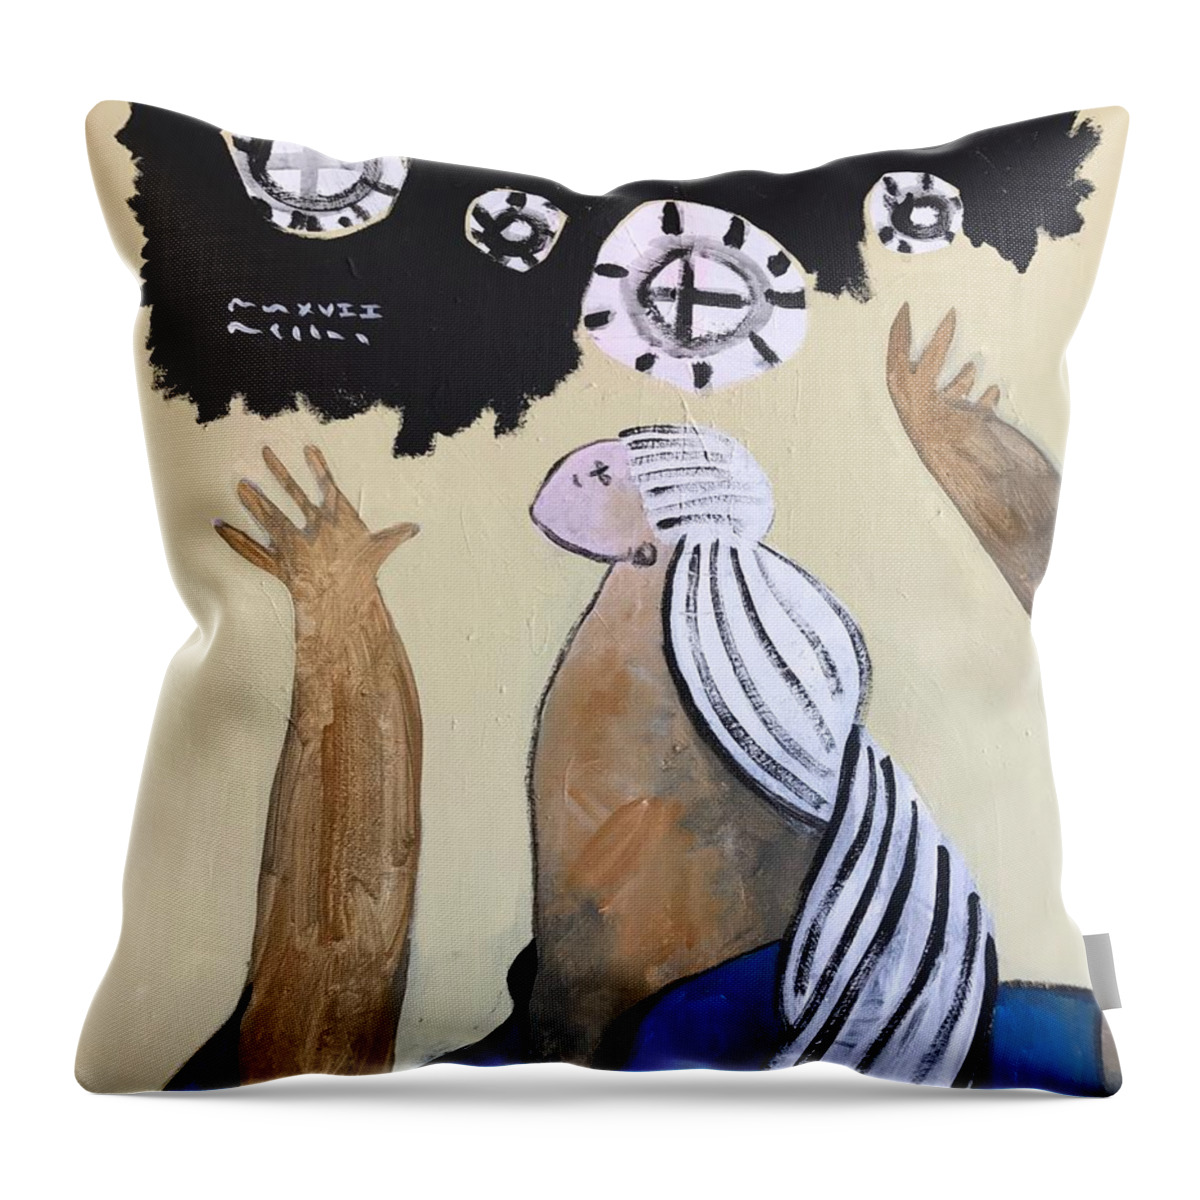  Abstract Throw Pillow featuring the painting MMXVII The Ascension No 4 by Mark M Mellon